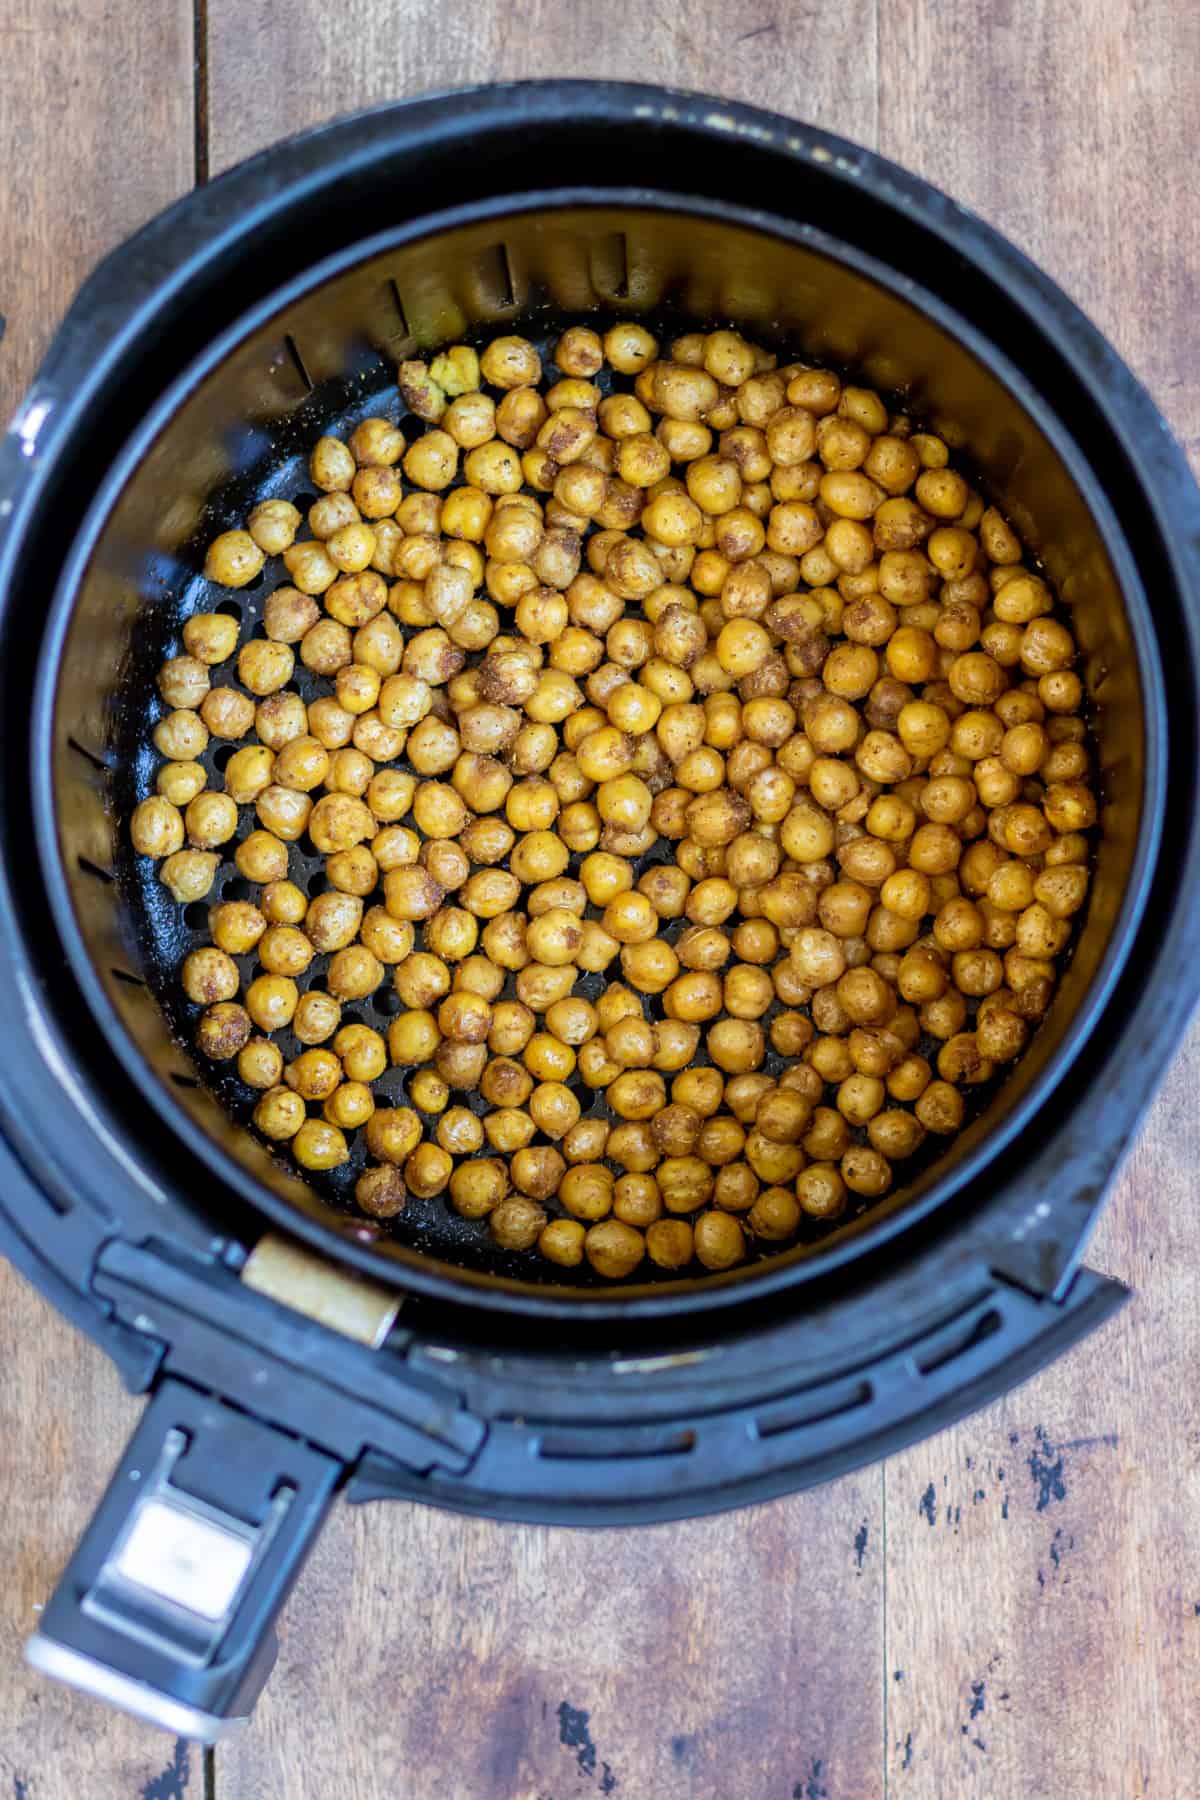 Cooked chickpeas in the air fryer.